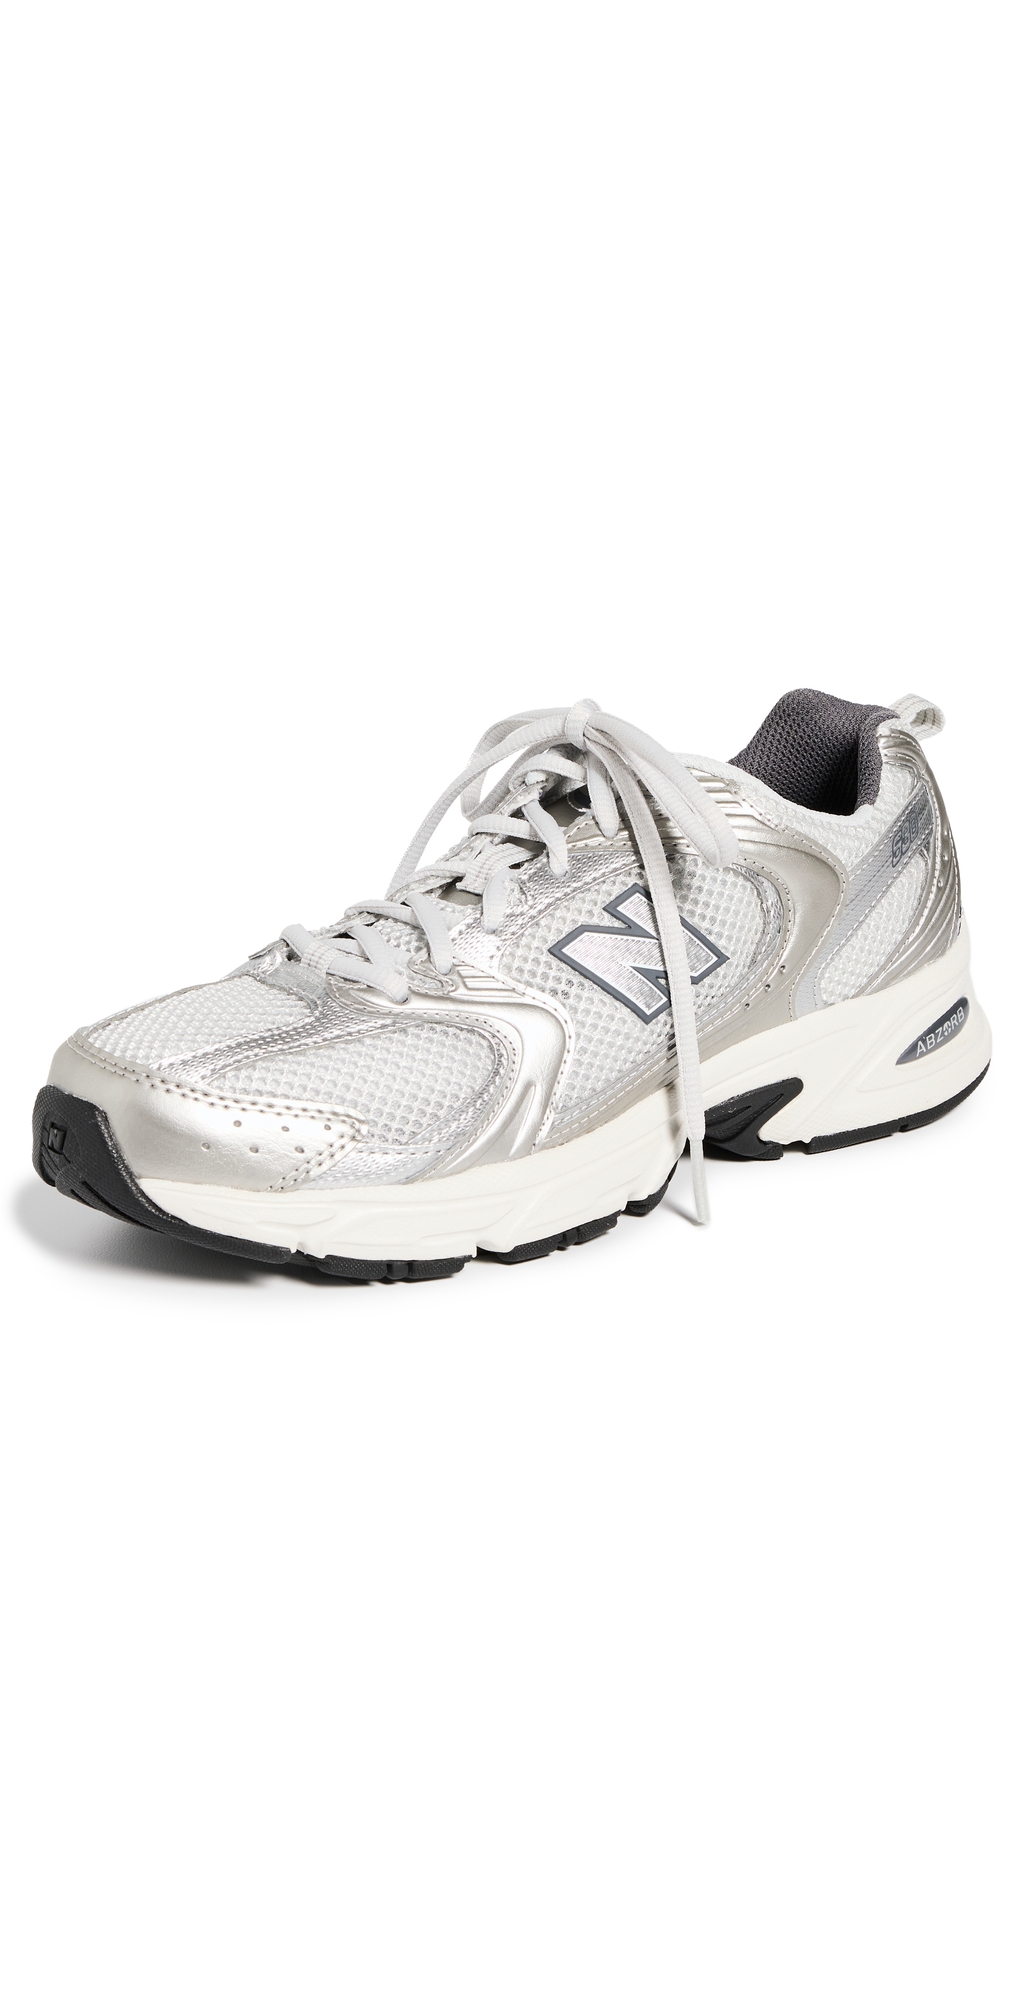 Buy New Balance 530 Sneakers Shoes Online | Shoes Trove